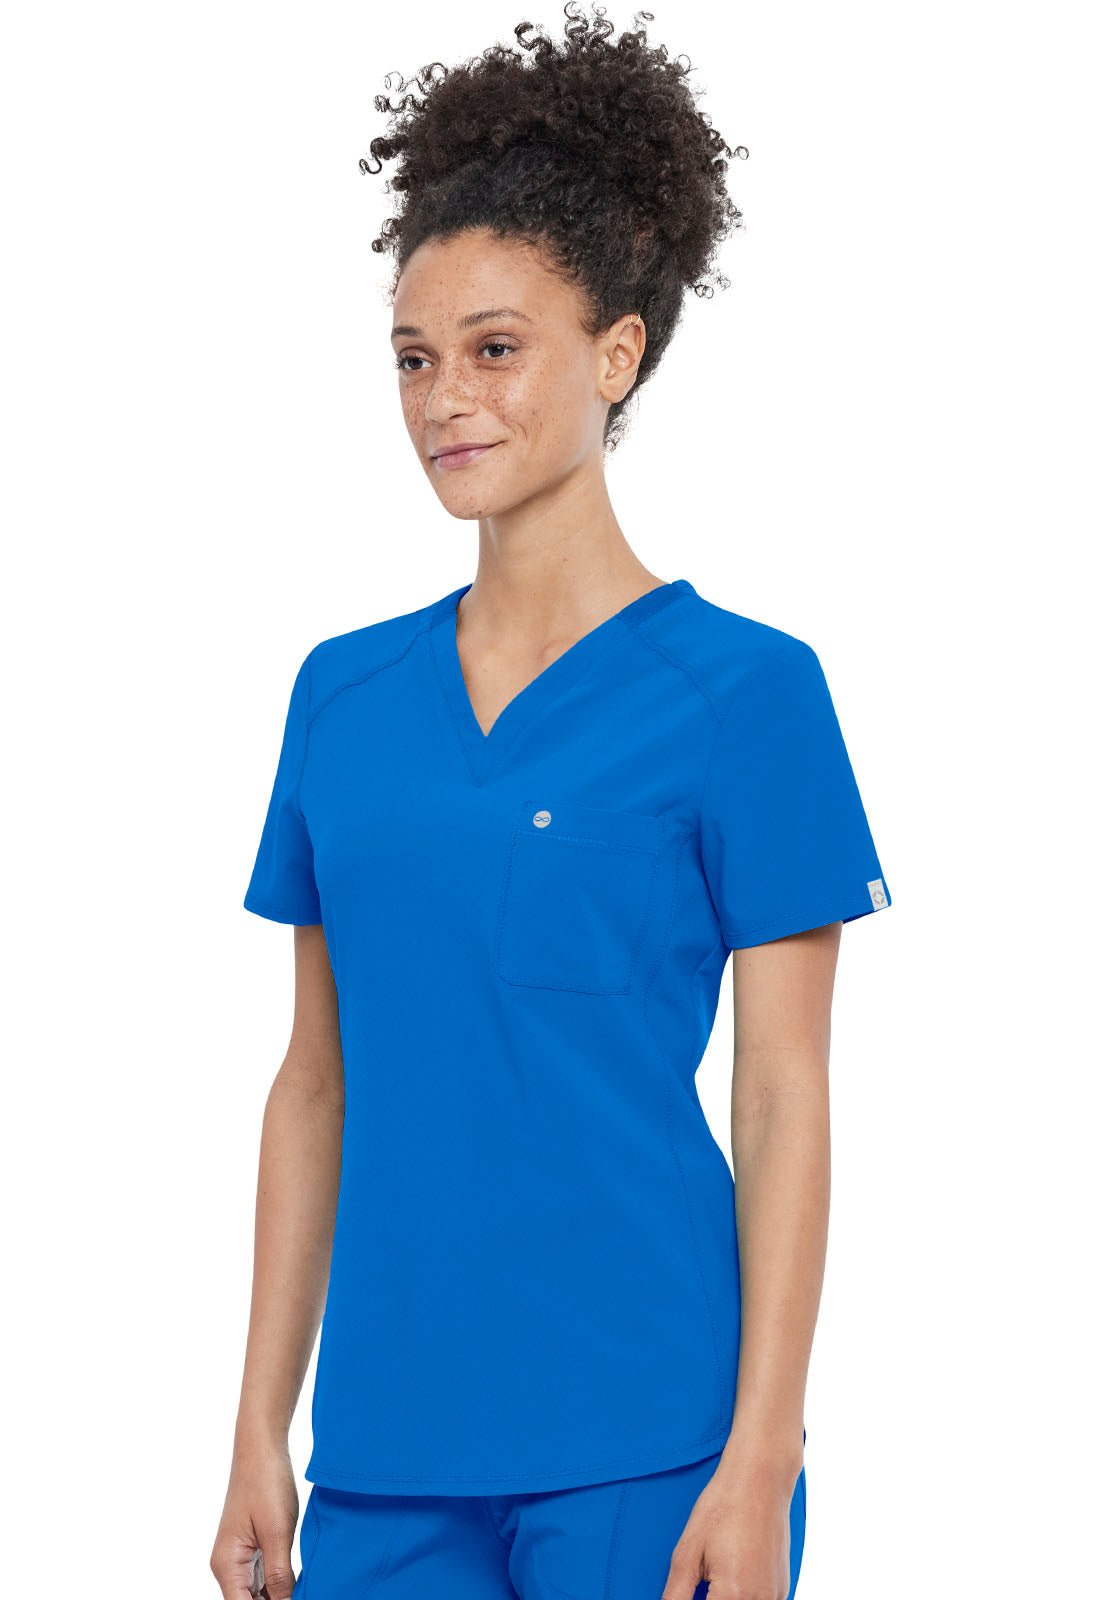 Royal Blue Infinity Scrubs Tuckable V-Neck Top- Left Side View